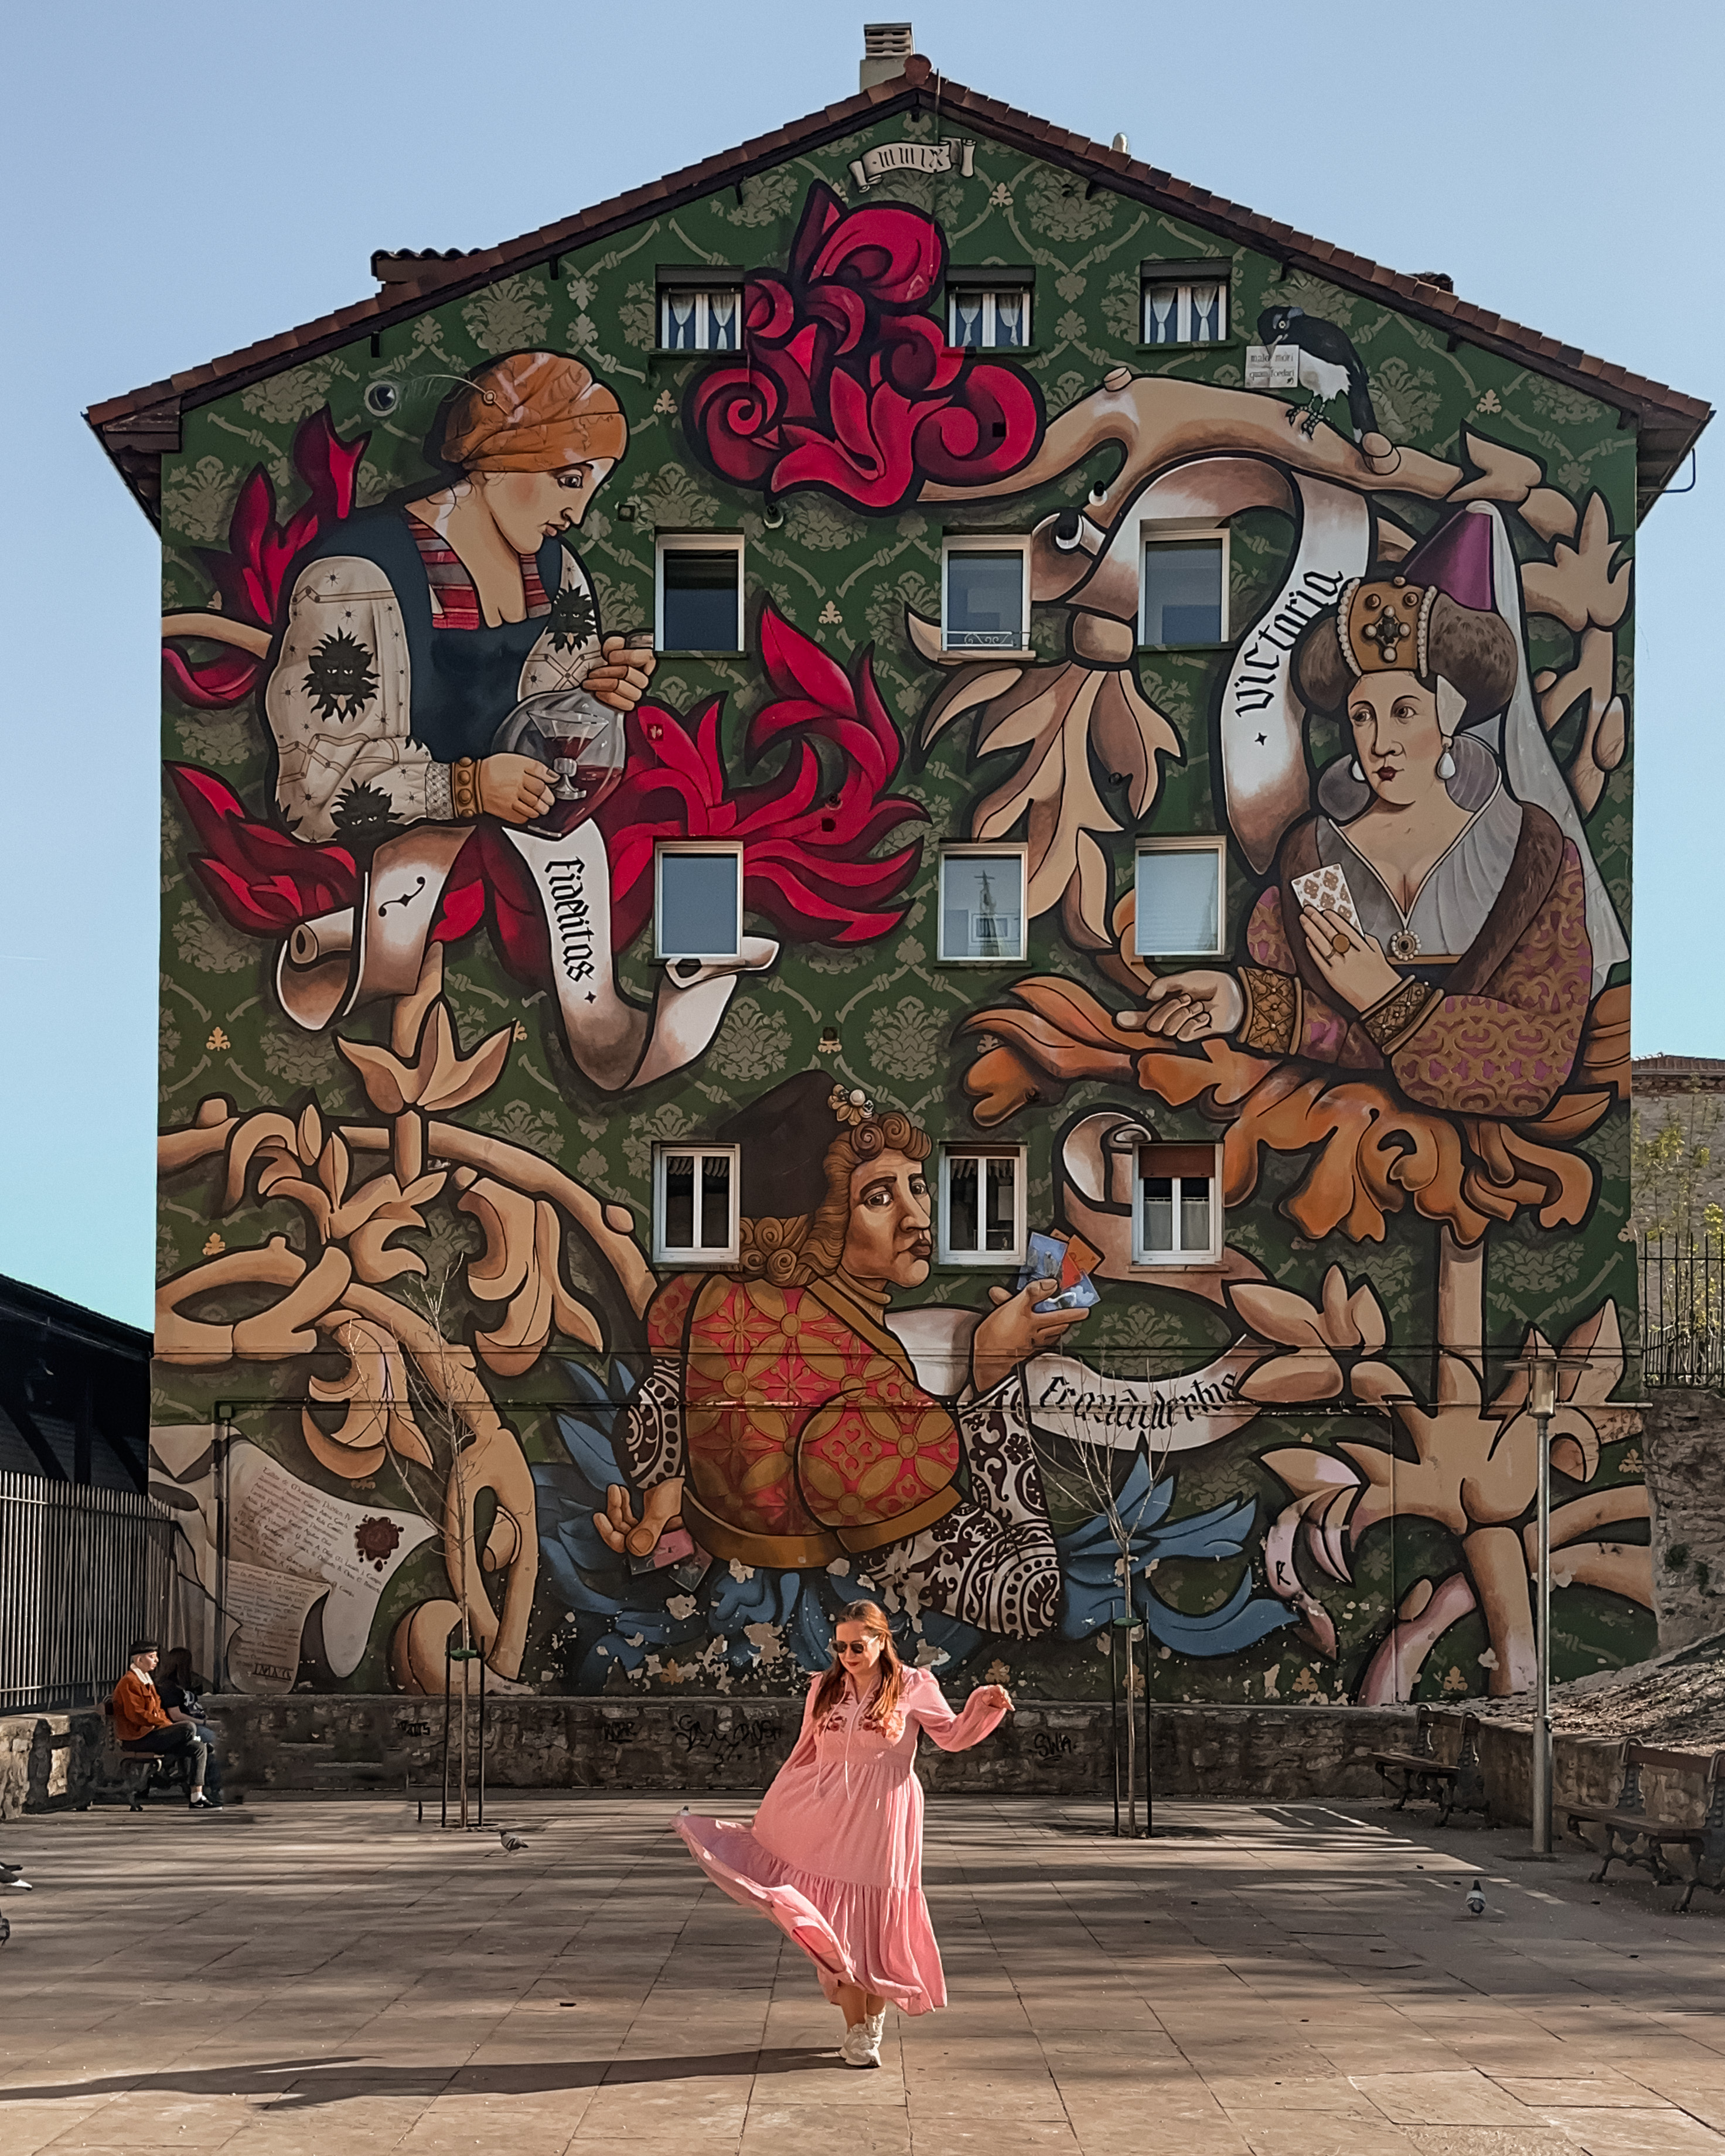 Woman in a pink dress having her photo taken in front of a mural in Vitoria Gasteiz